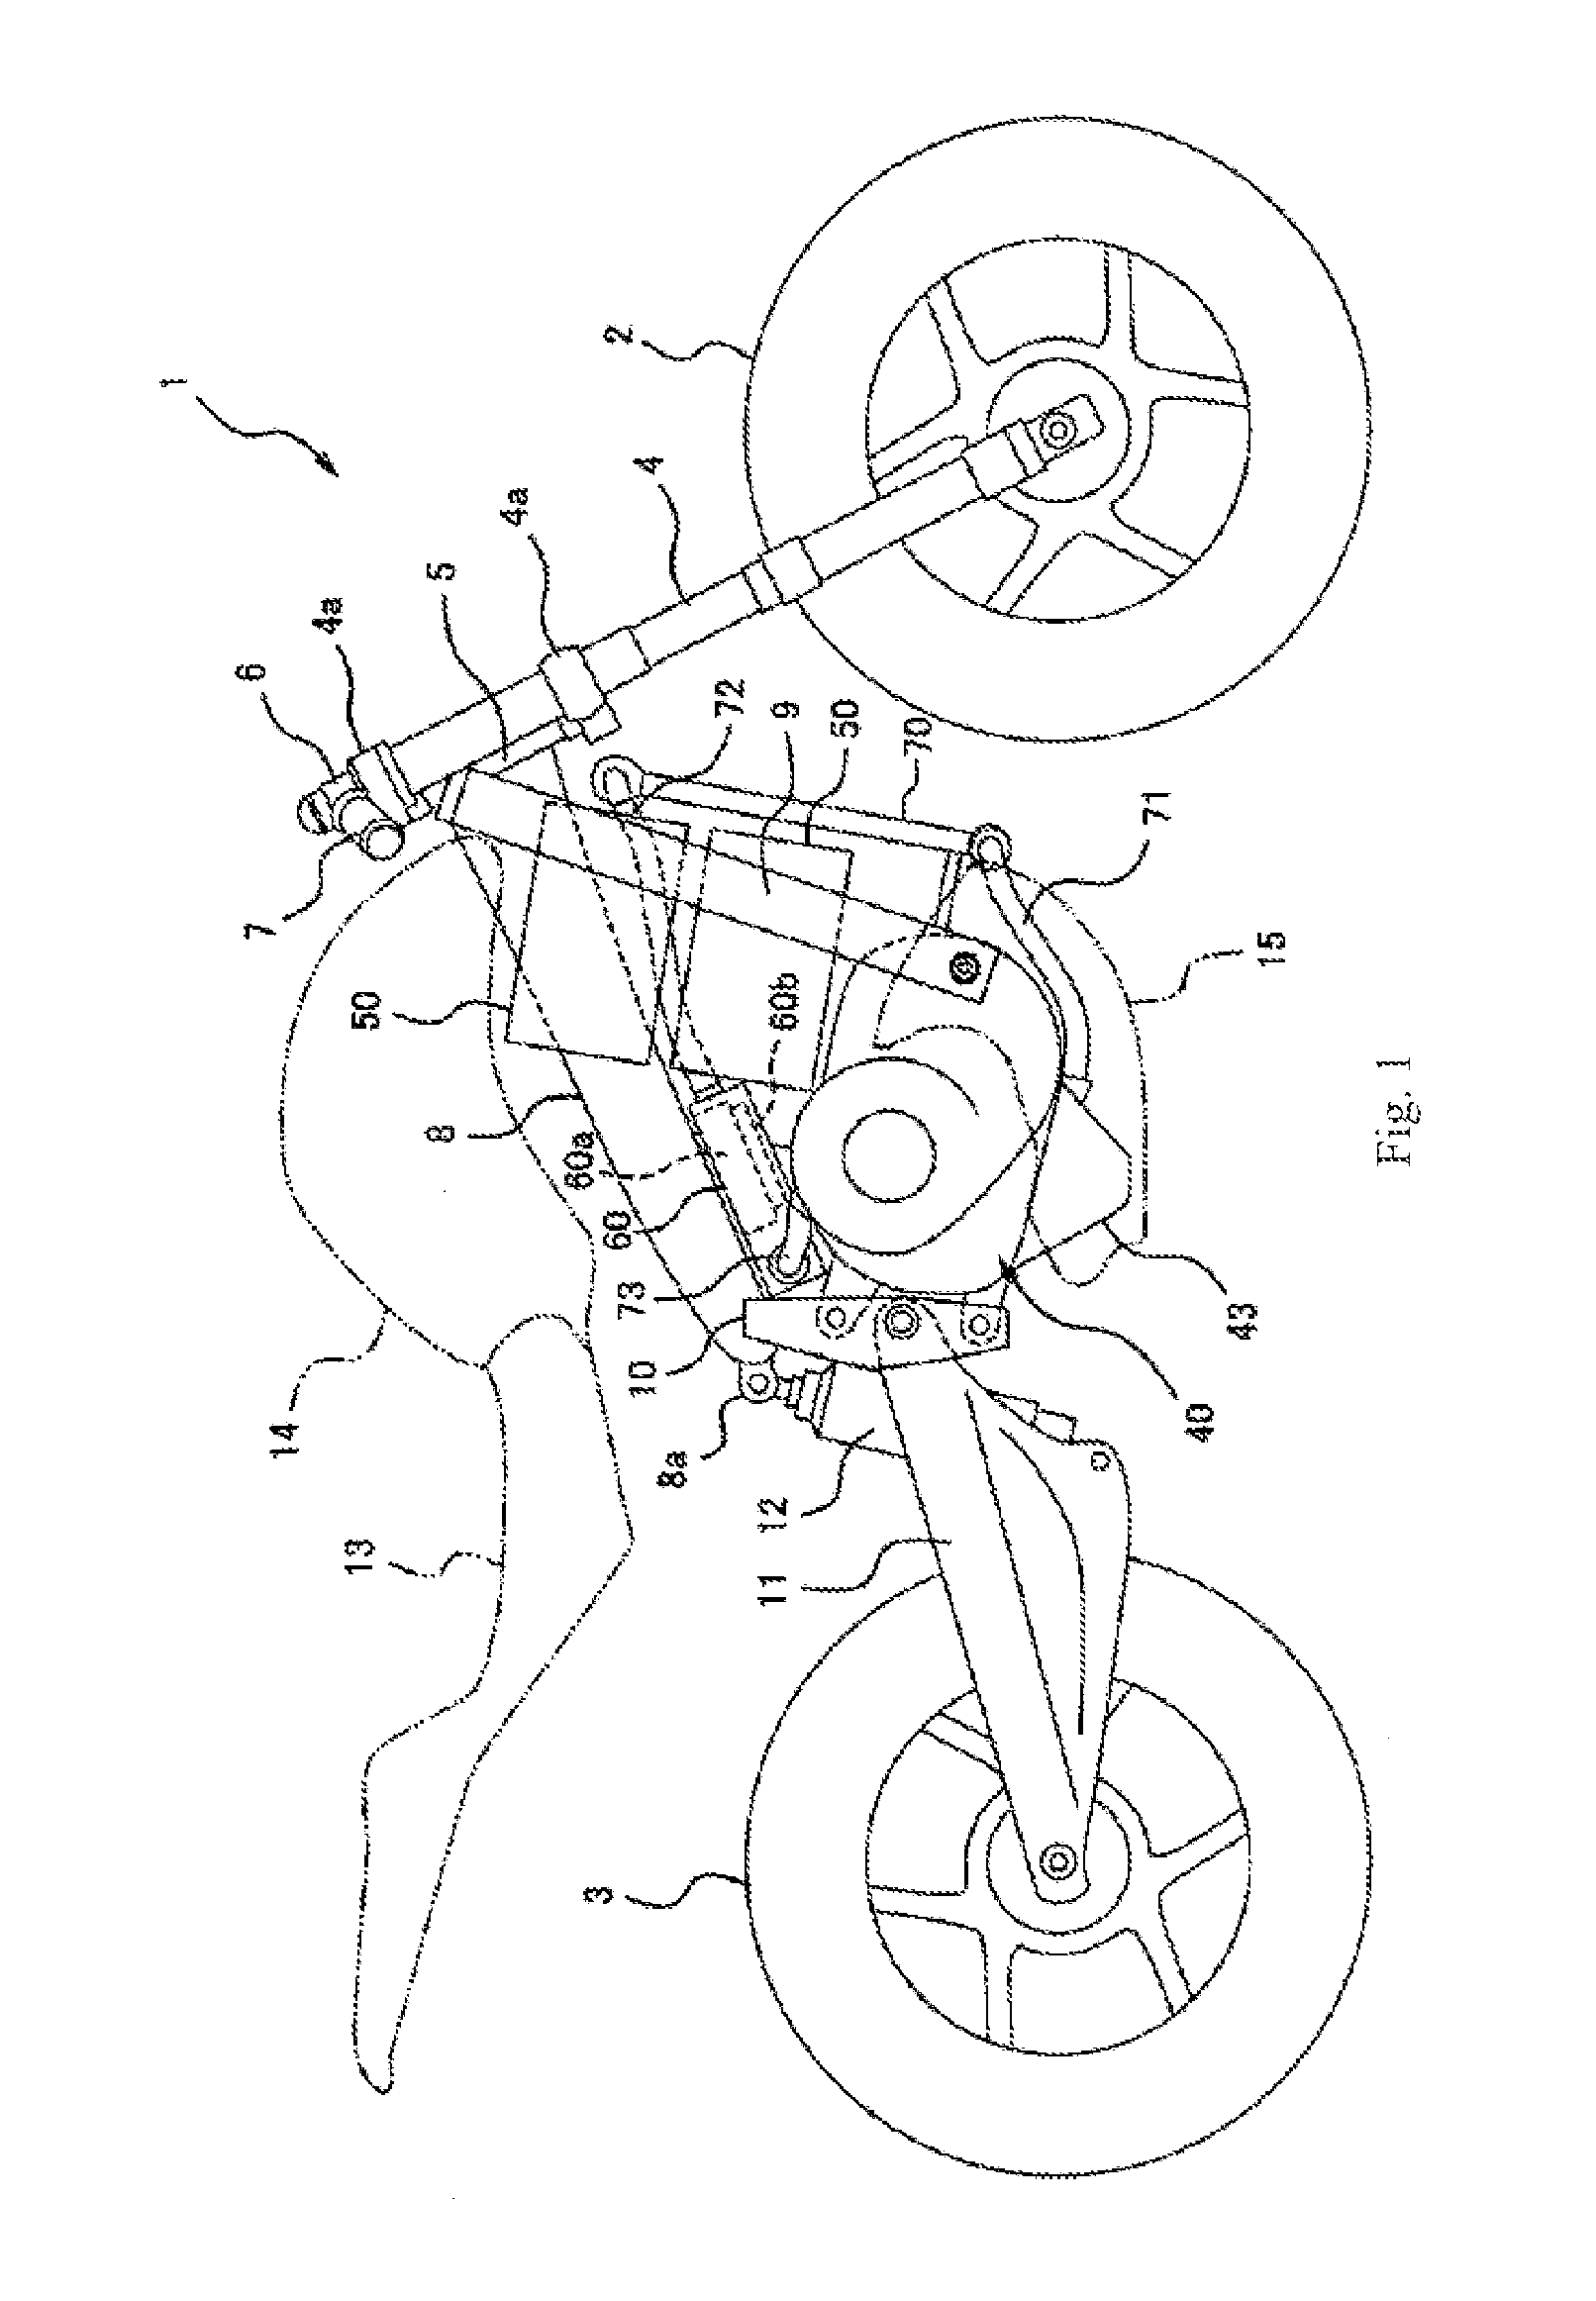 Cooling Structure for Electric Vehicle